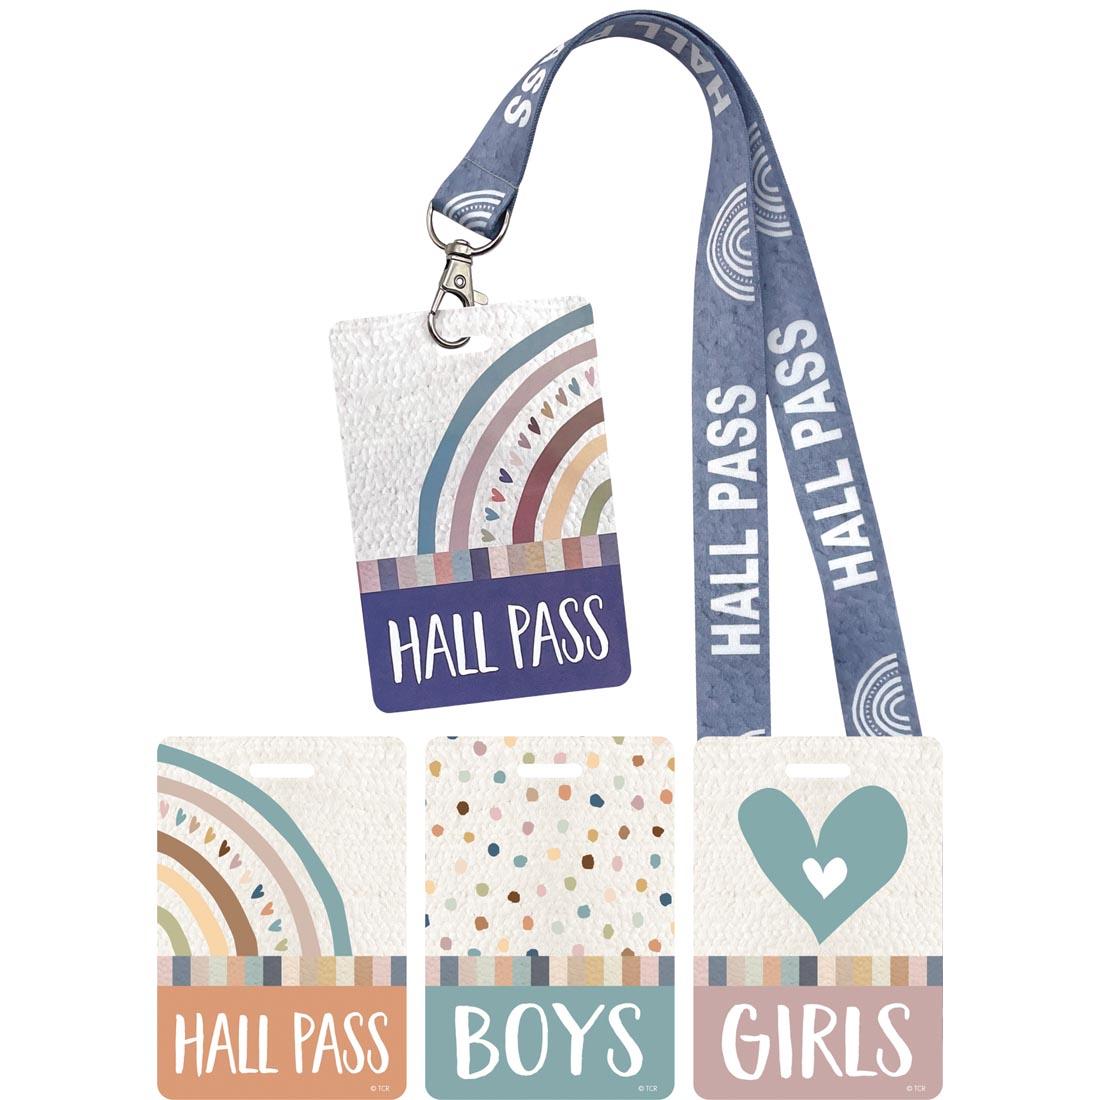 Hall Pass Lanyards from the Everyone Is Welcome collection by Teacher Created Resources